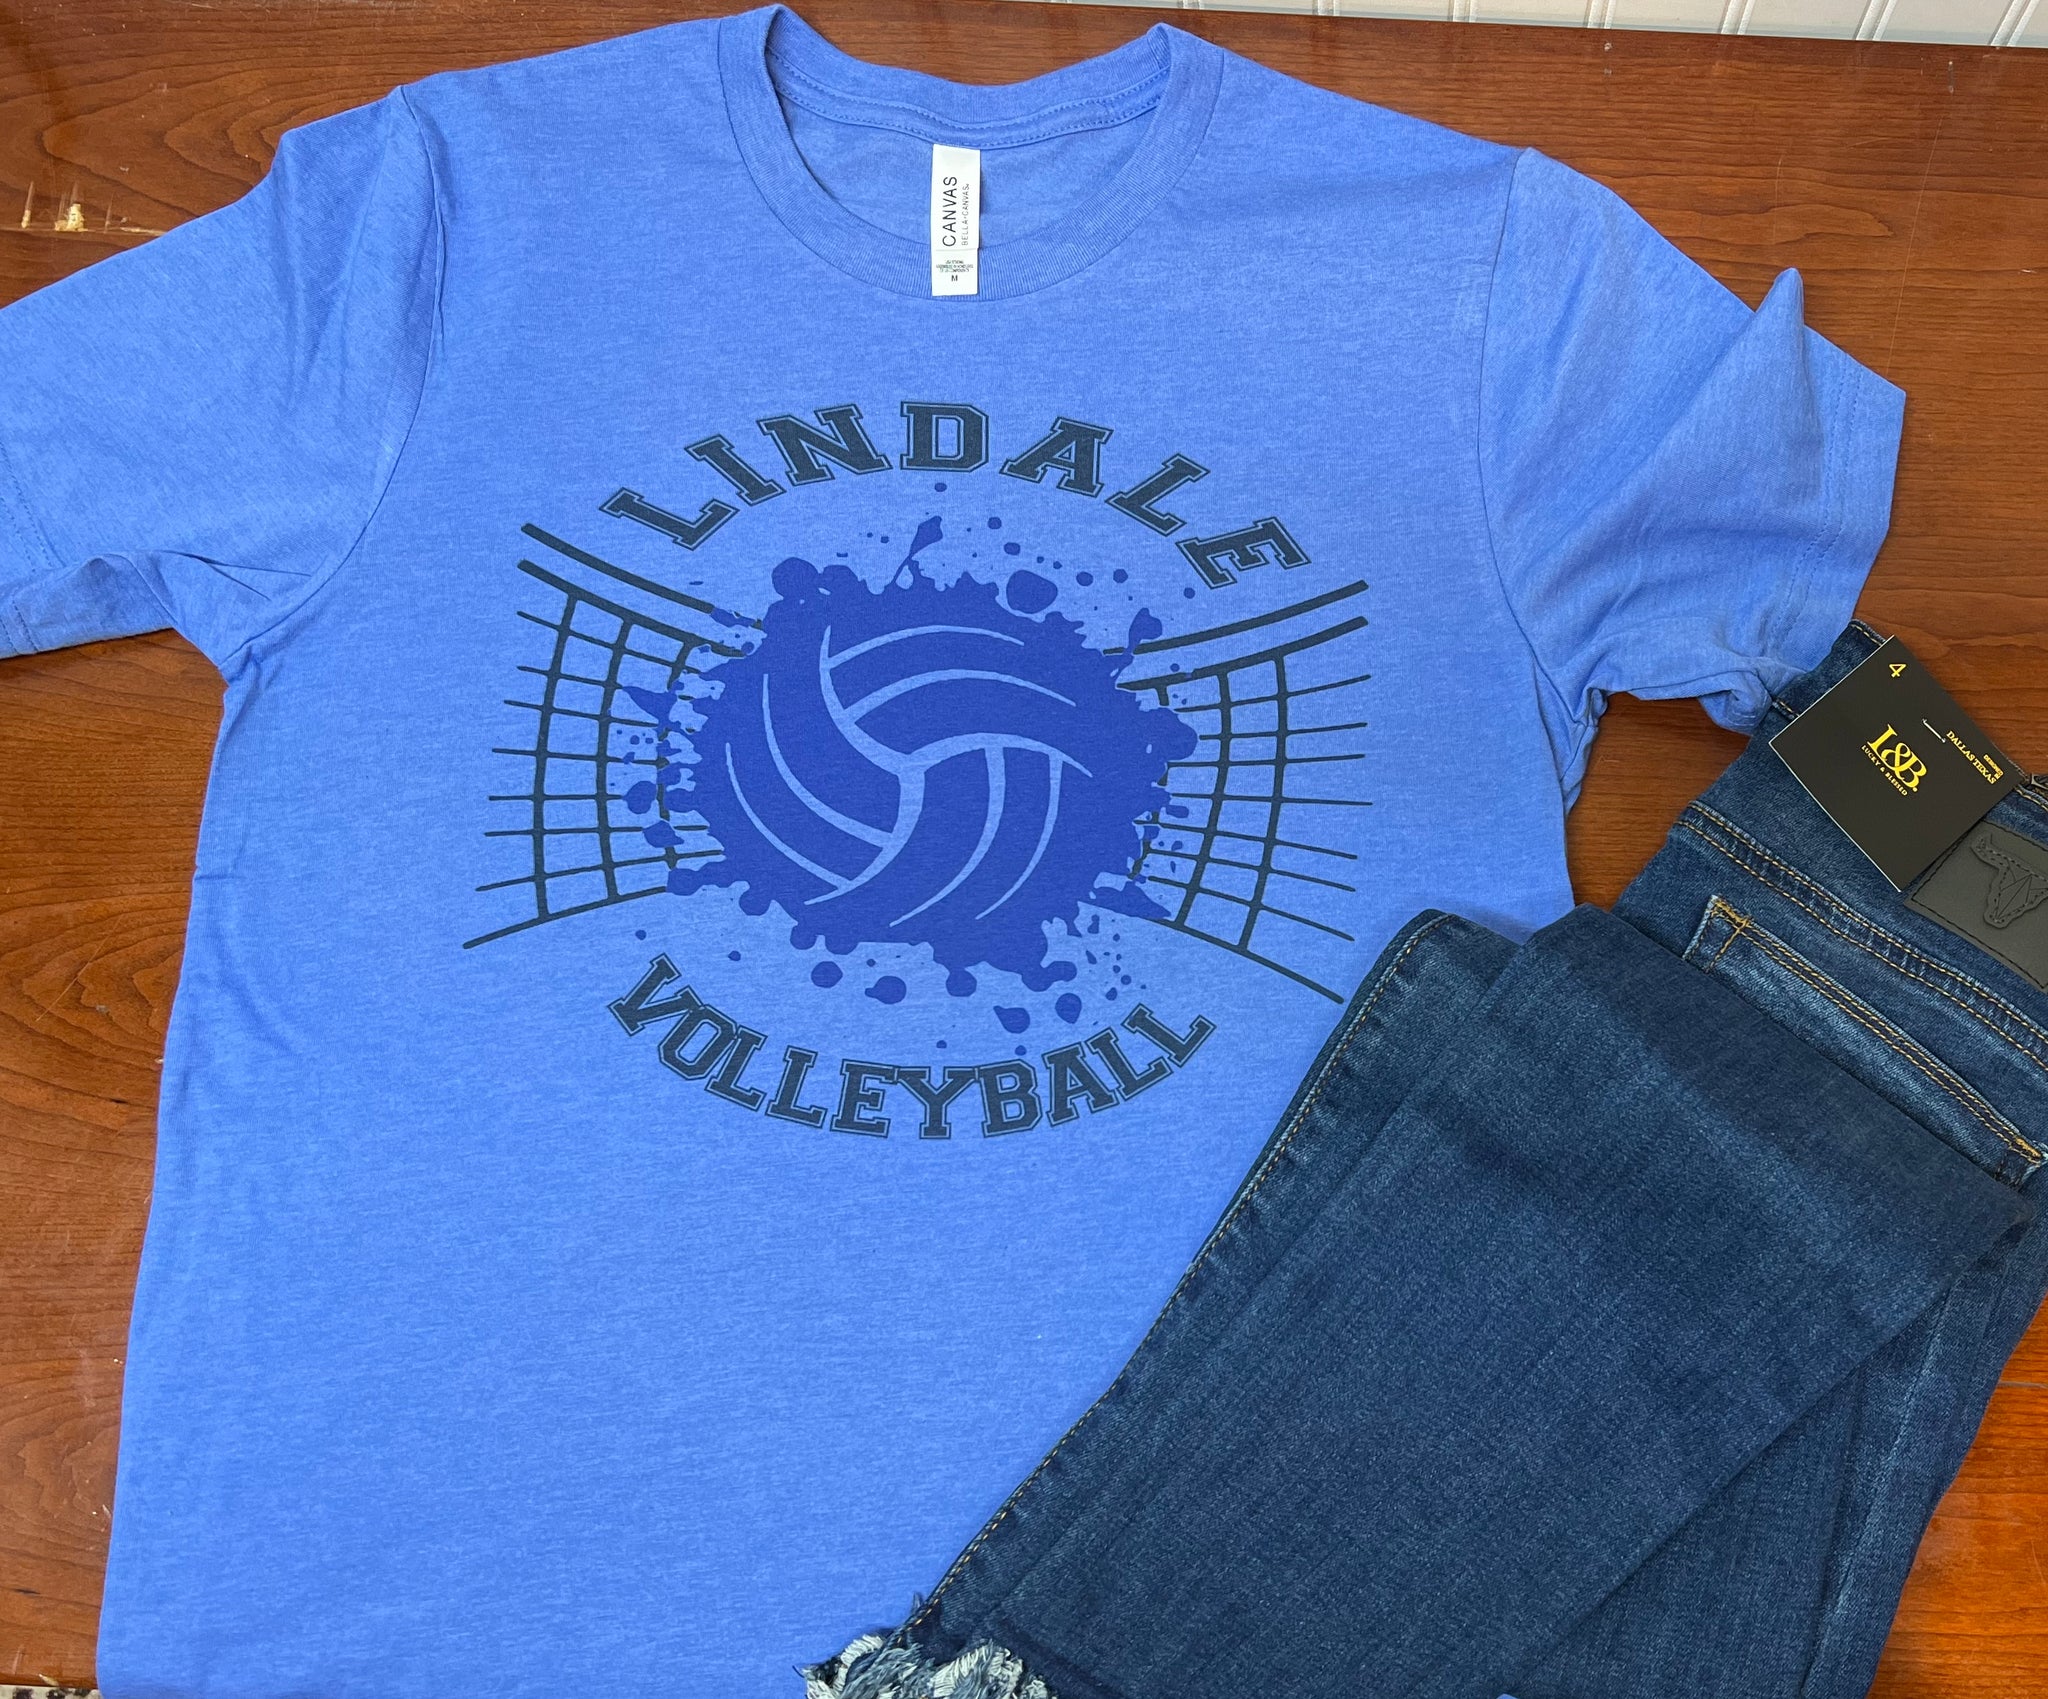 Lindale Volleyball